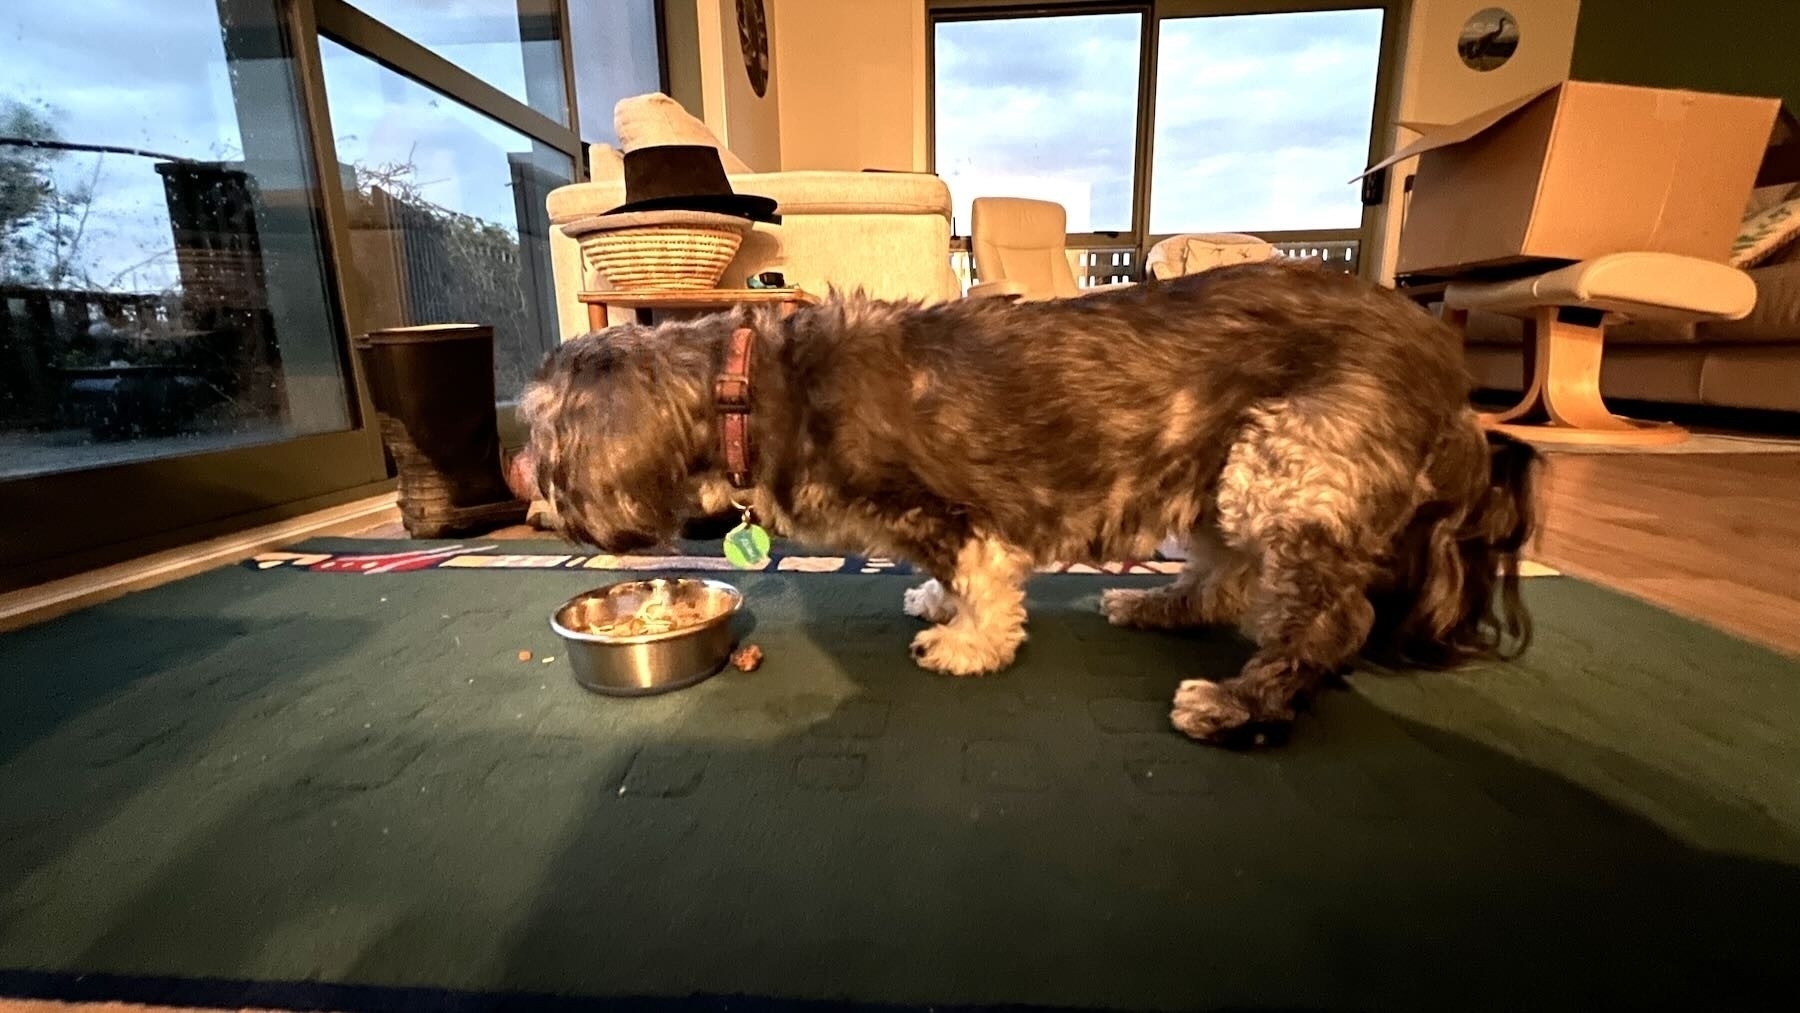 Small black dog eating from a bowl on the floor. 